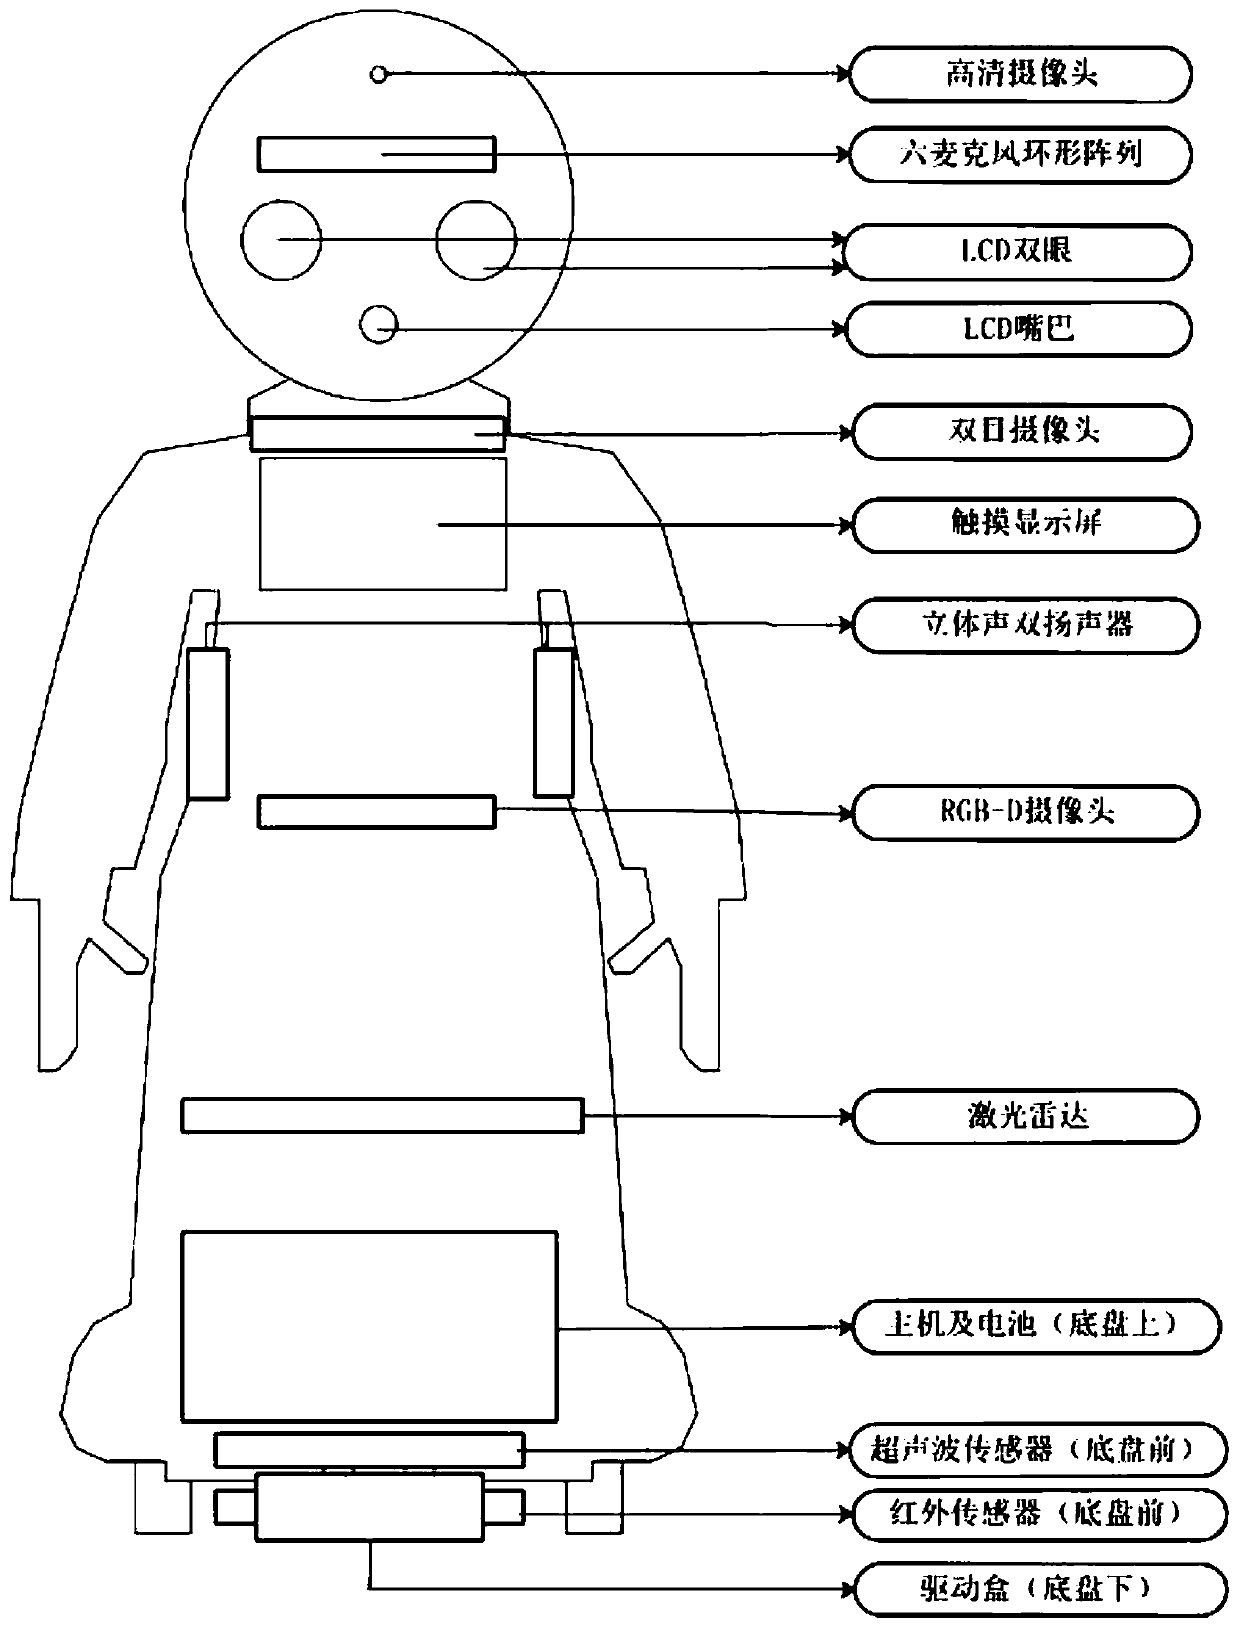 Intelligent aged-supporting accompany robot